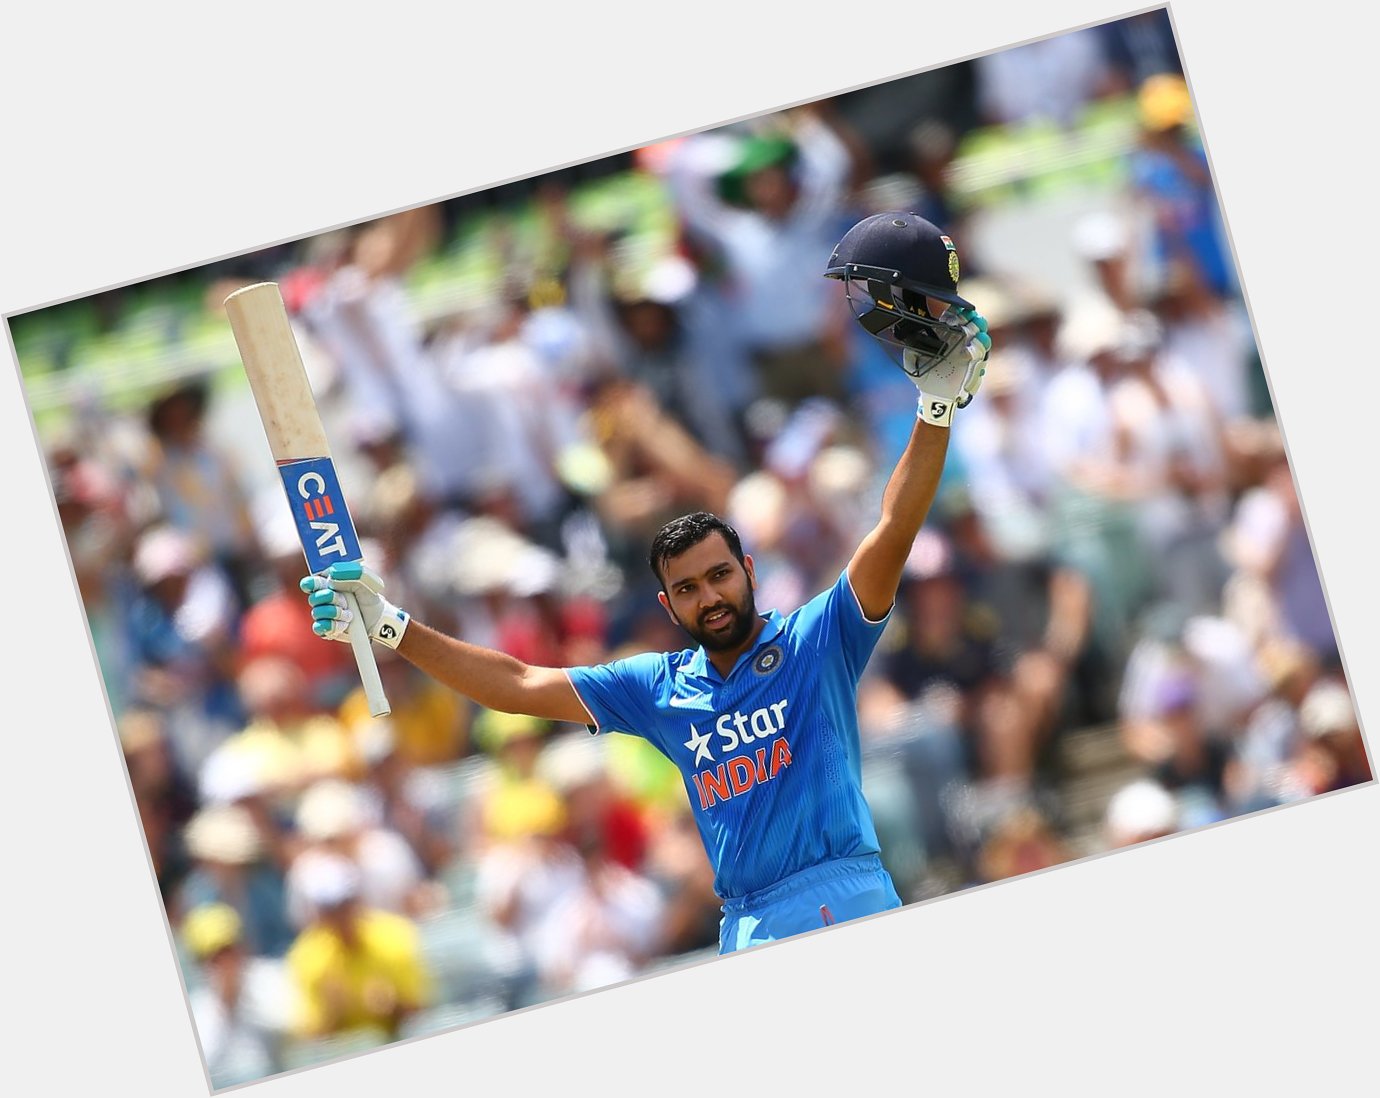 His 264 is the highest ever individual ODI score - Happy Birthday, Rohit Sharma! 